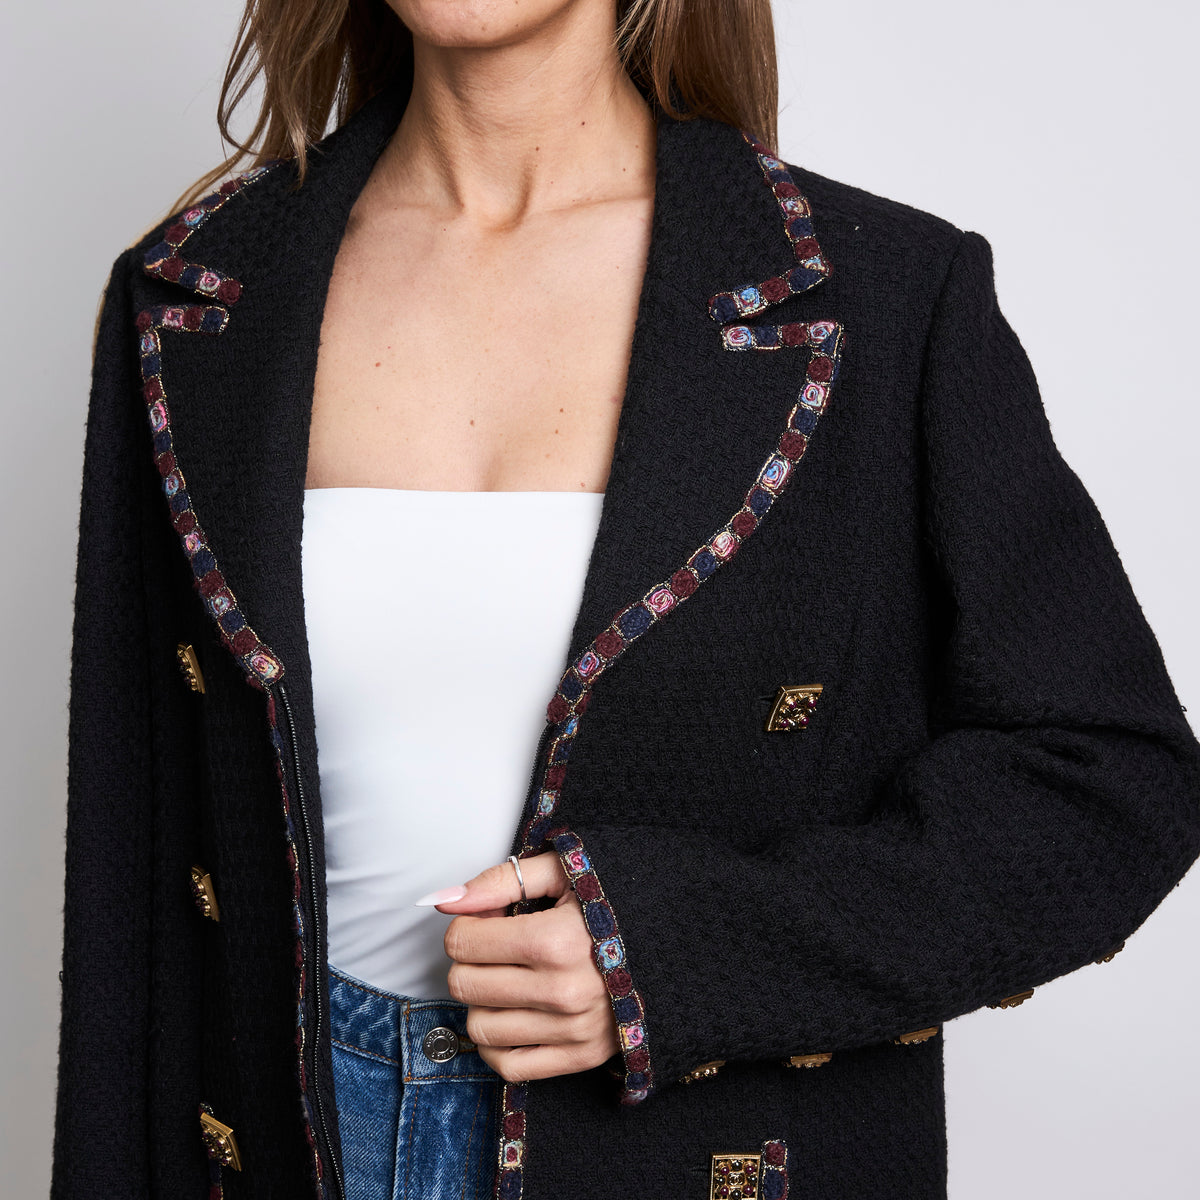 Pre-Loved Chanel™ Black Tweed Jacket with Multicolor Embroidered Trim